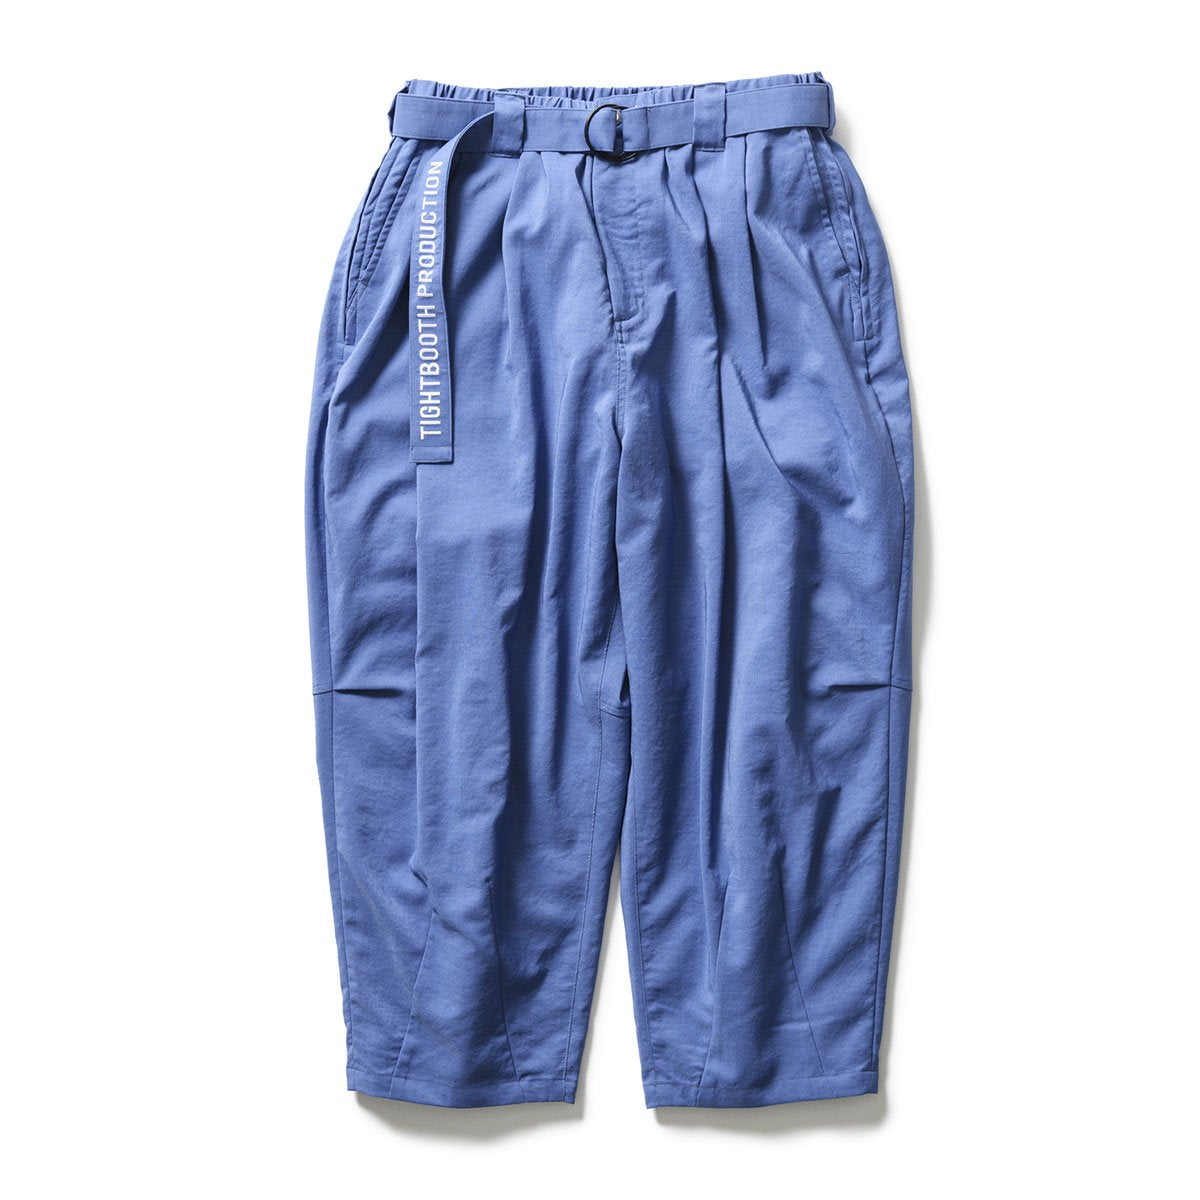 TIGHTBOOTH PRODUCTION BALLOON PANTS 工作褲